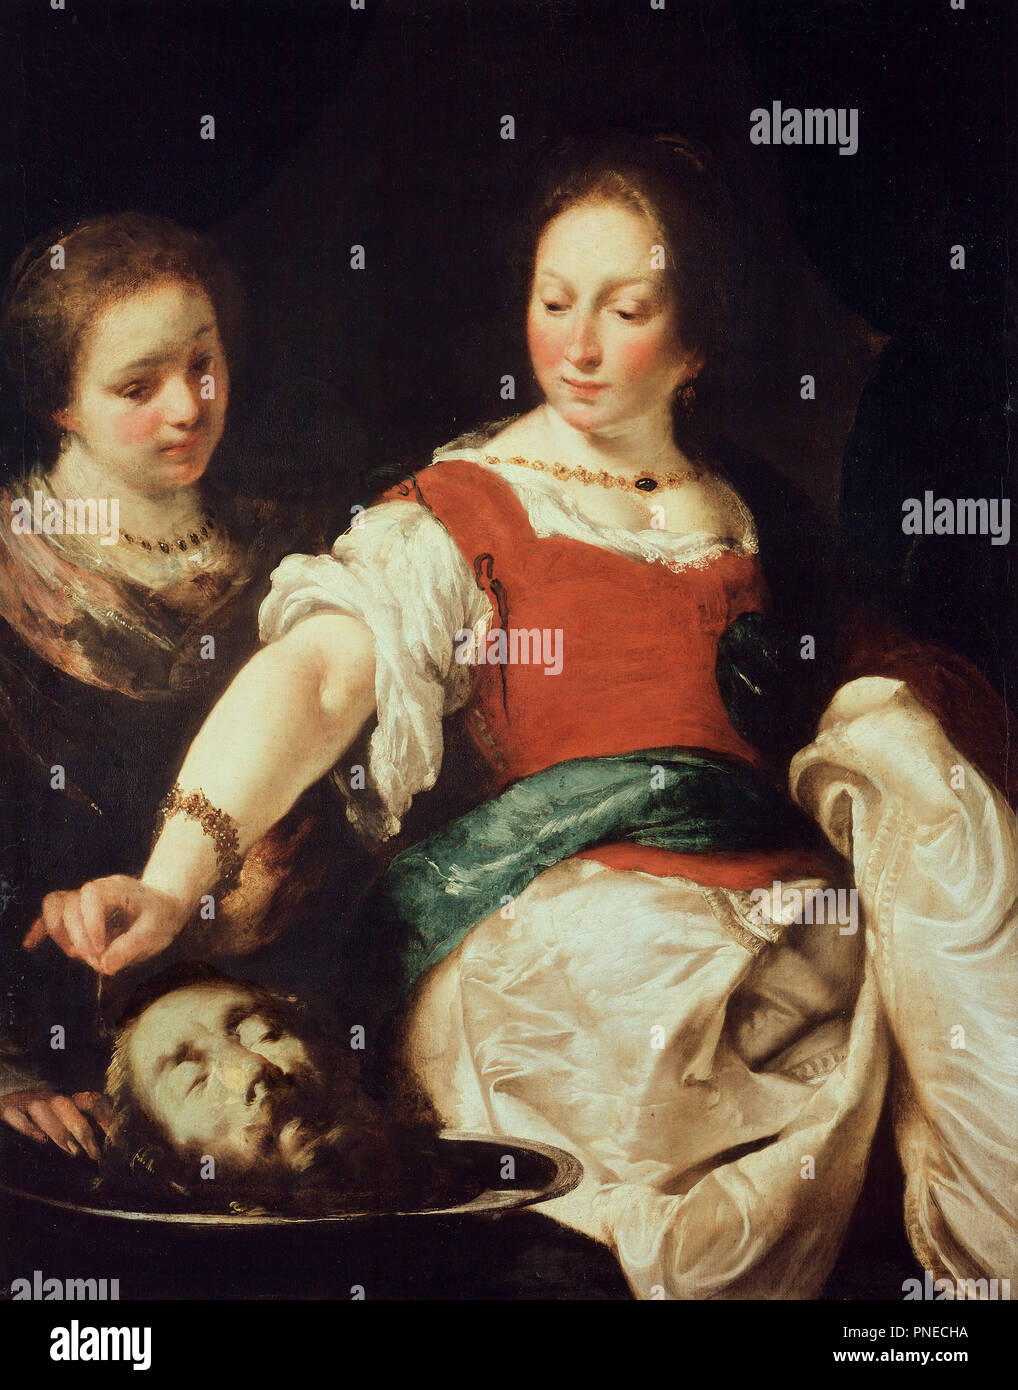 Salome. Date/Period: After 1630. Painting. Oil on canvas. Height: 124 cm (48.8 in); Width: 94 cm (37 in). Author: Bernardo Strozzi. Stock Photo